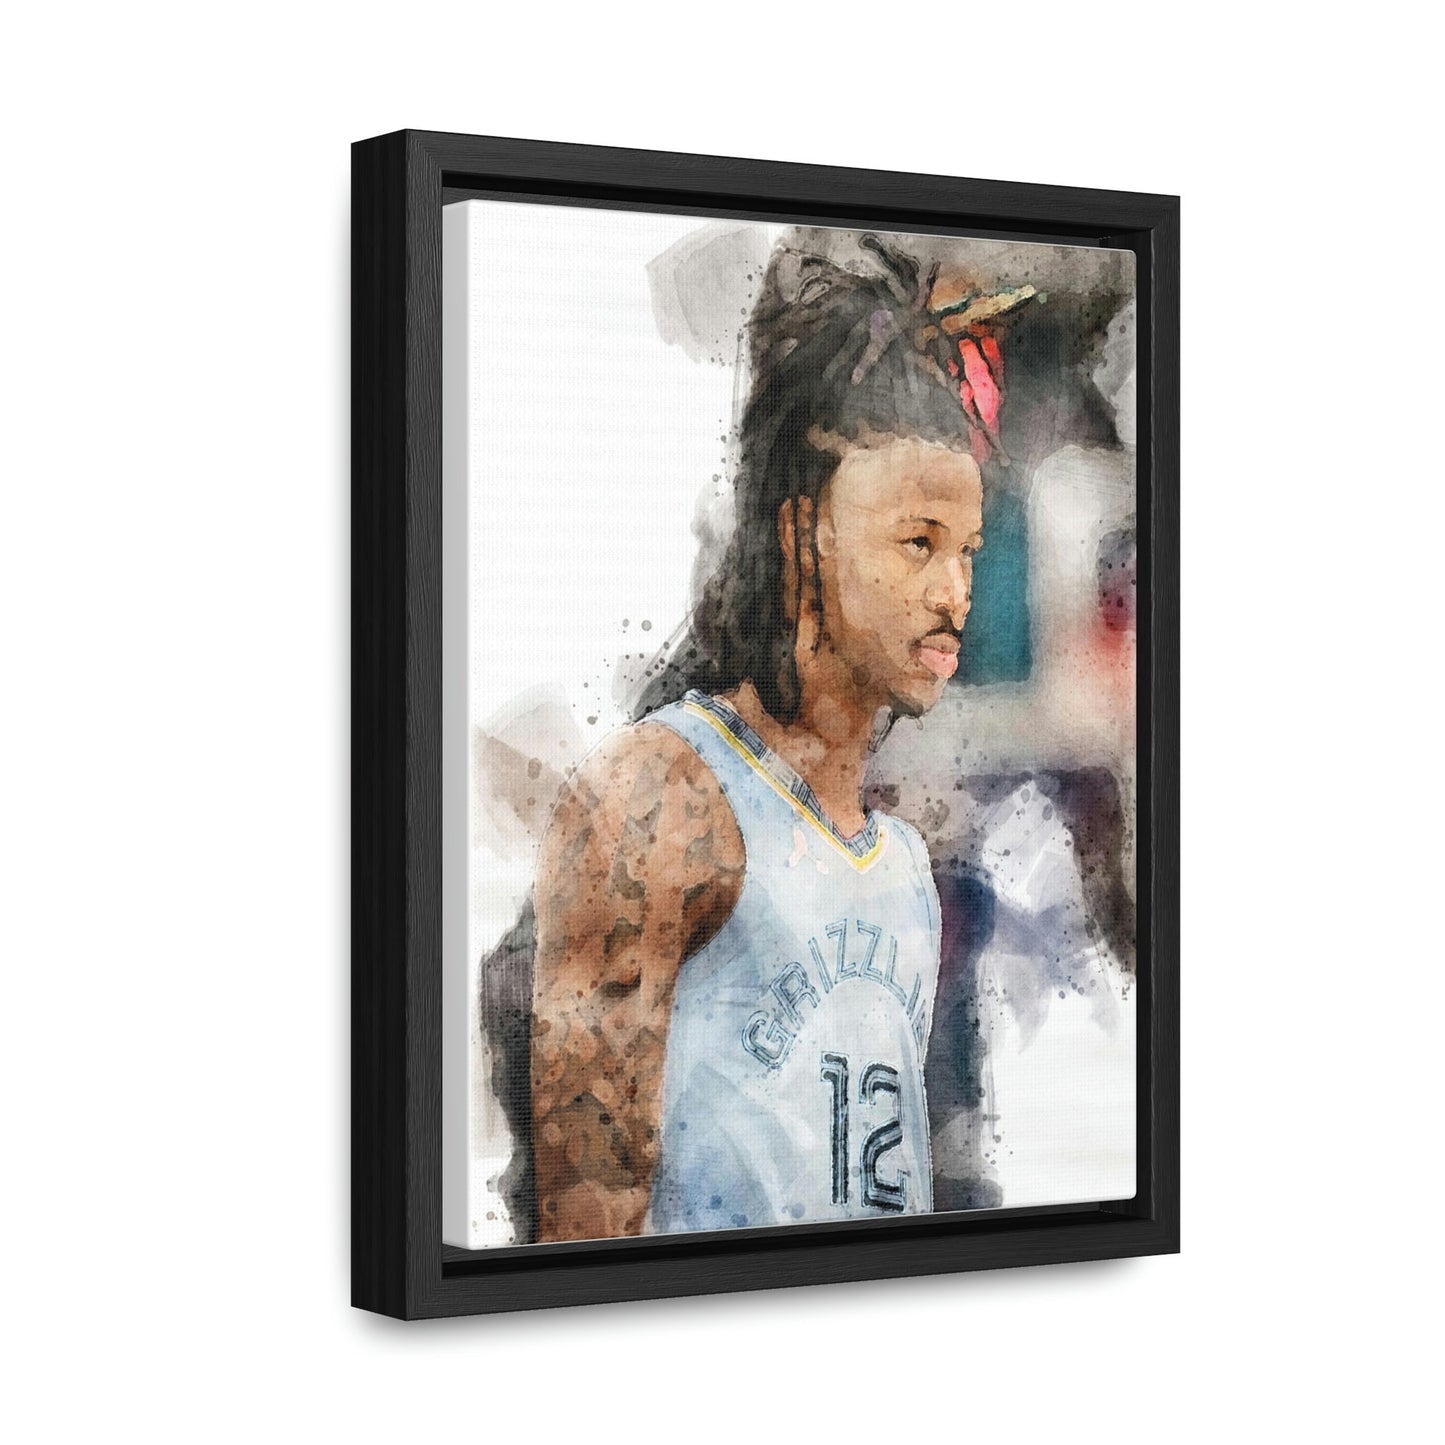 Ja Morant Poster, Canvas Wrap, Kids Room, Man Cave, Woman Cave, Game Room